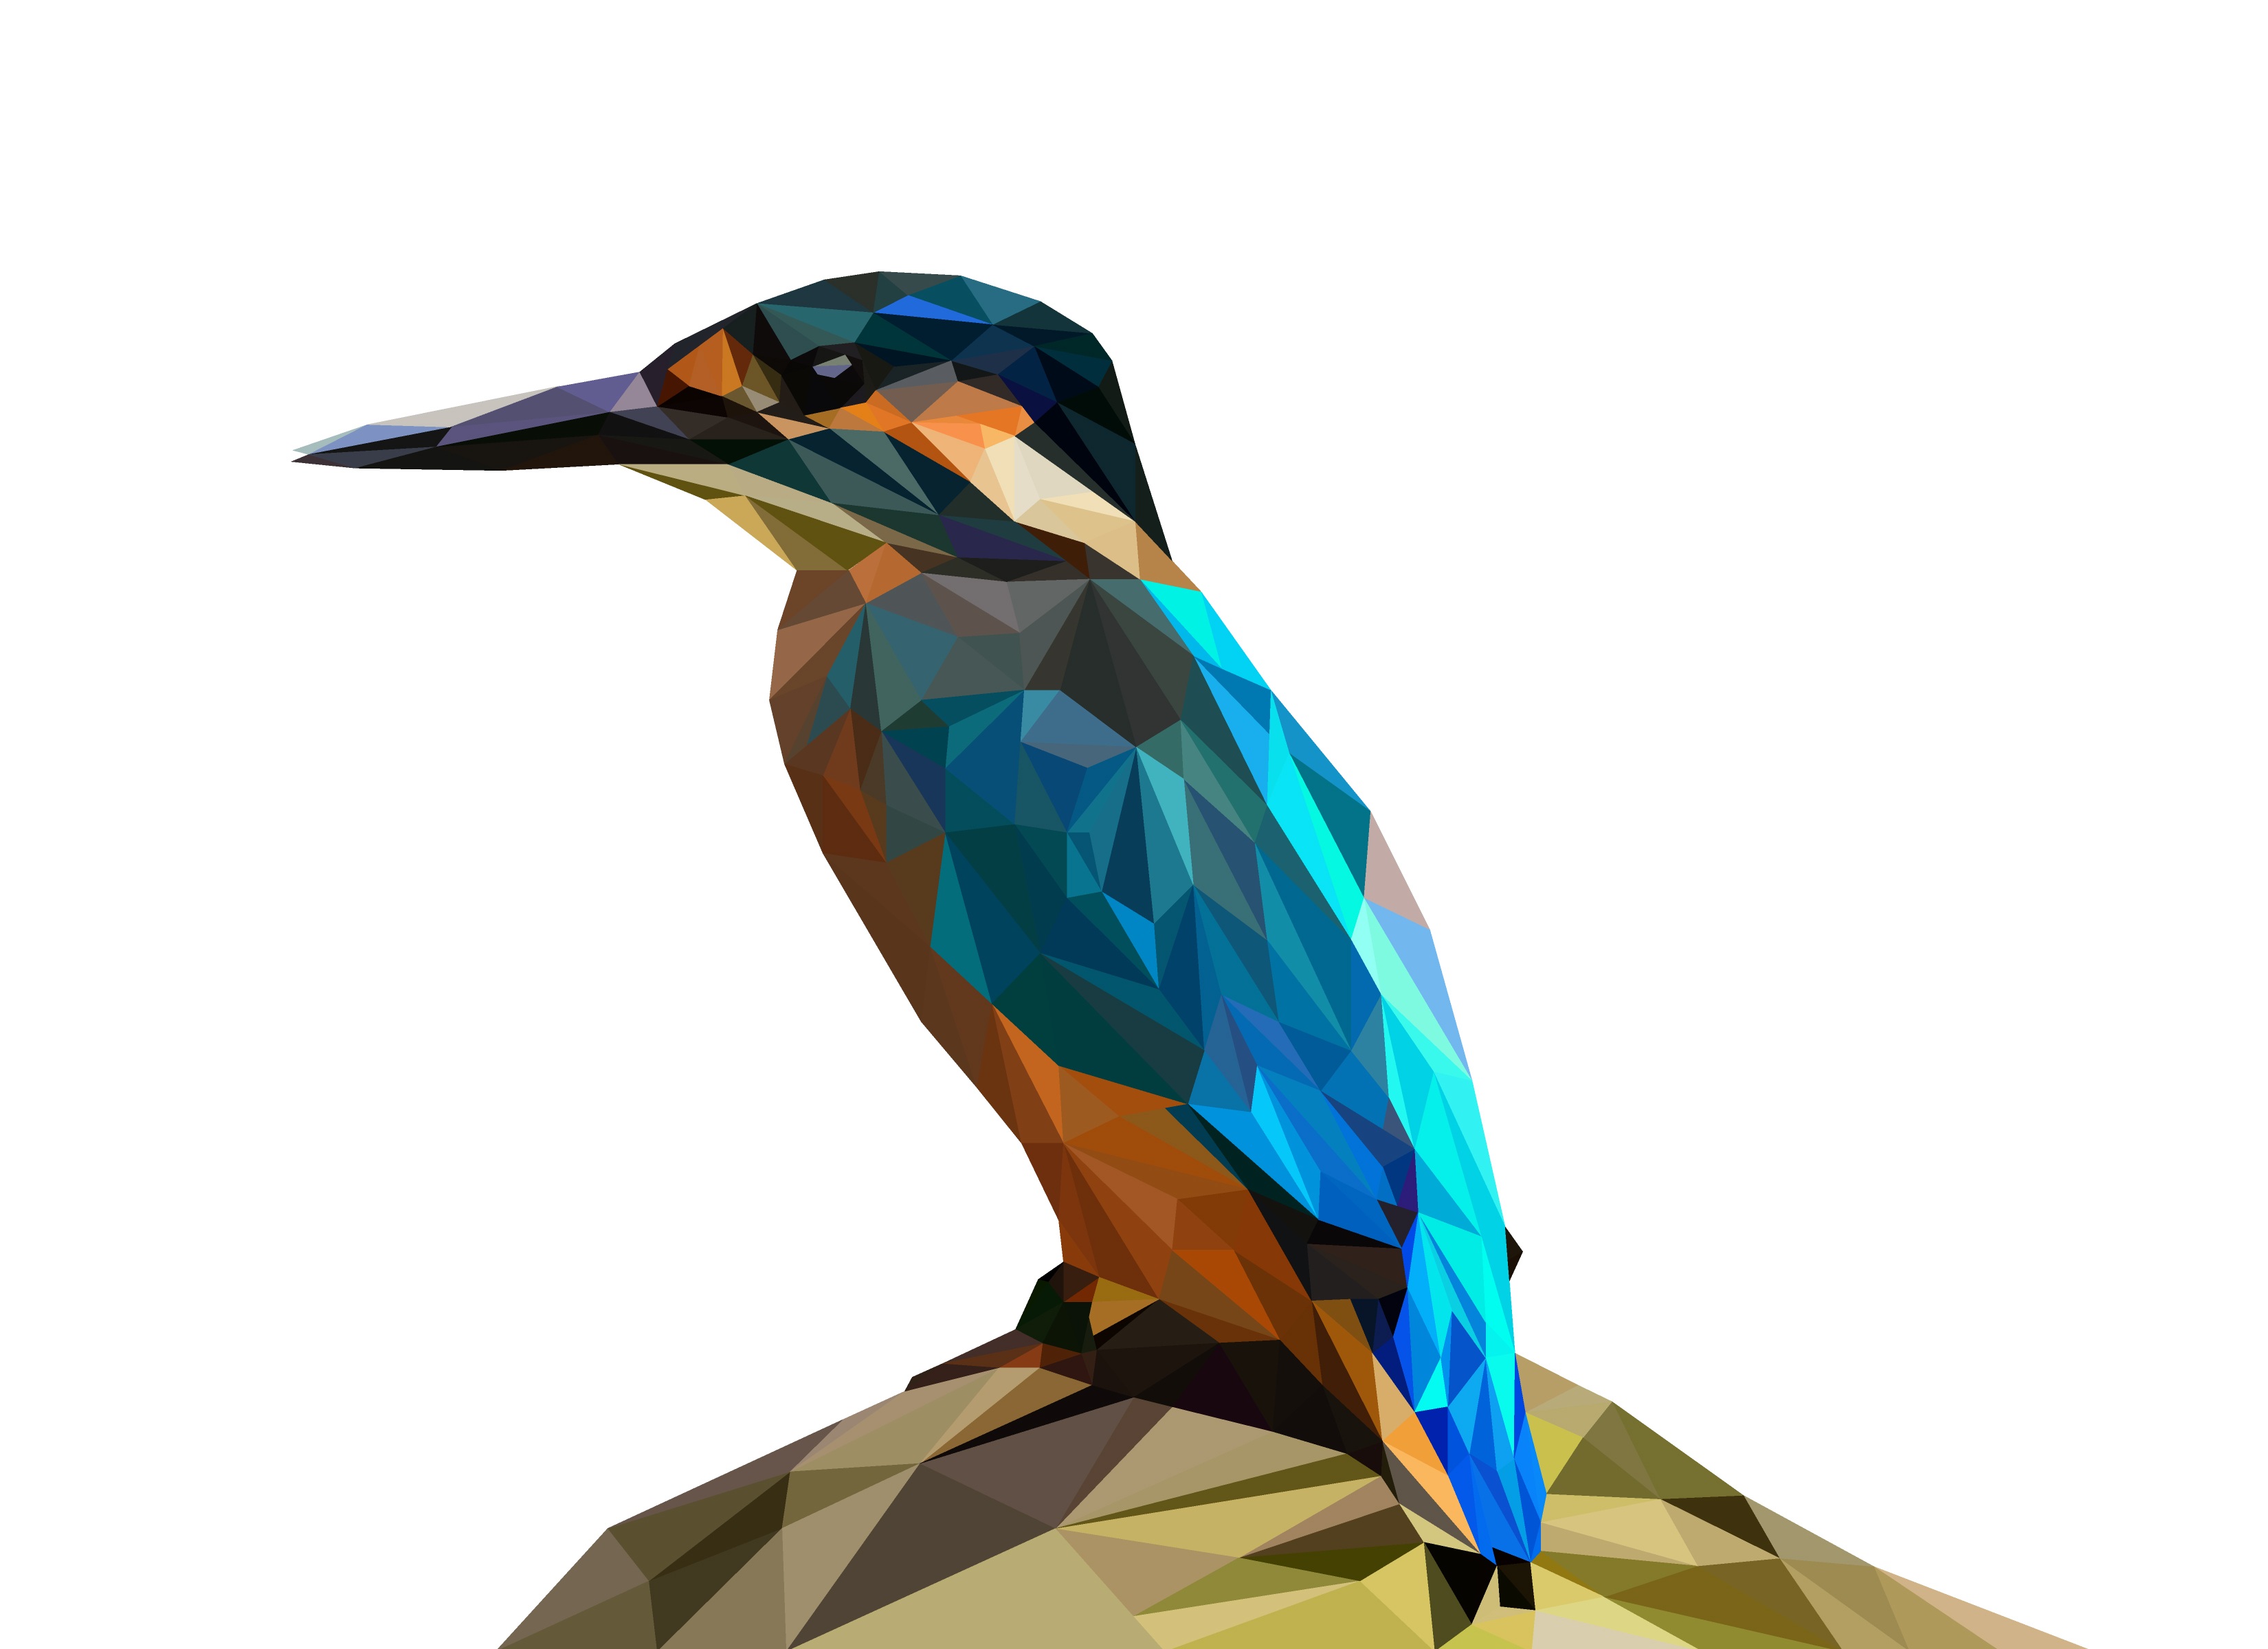 Kingfisher Wallpaper - Low Poly Illustrator Triangle , HD Wallpaper & Backgrounds